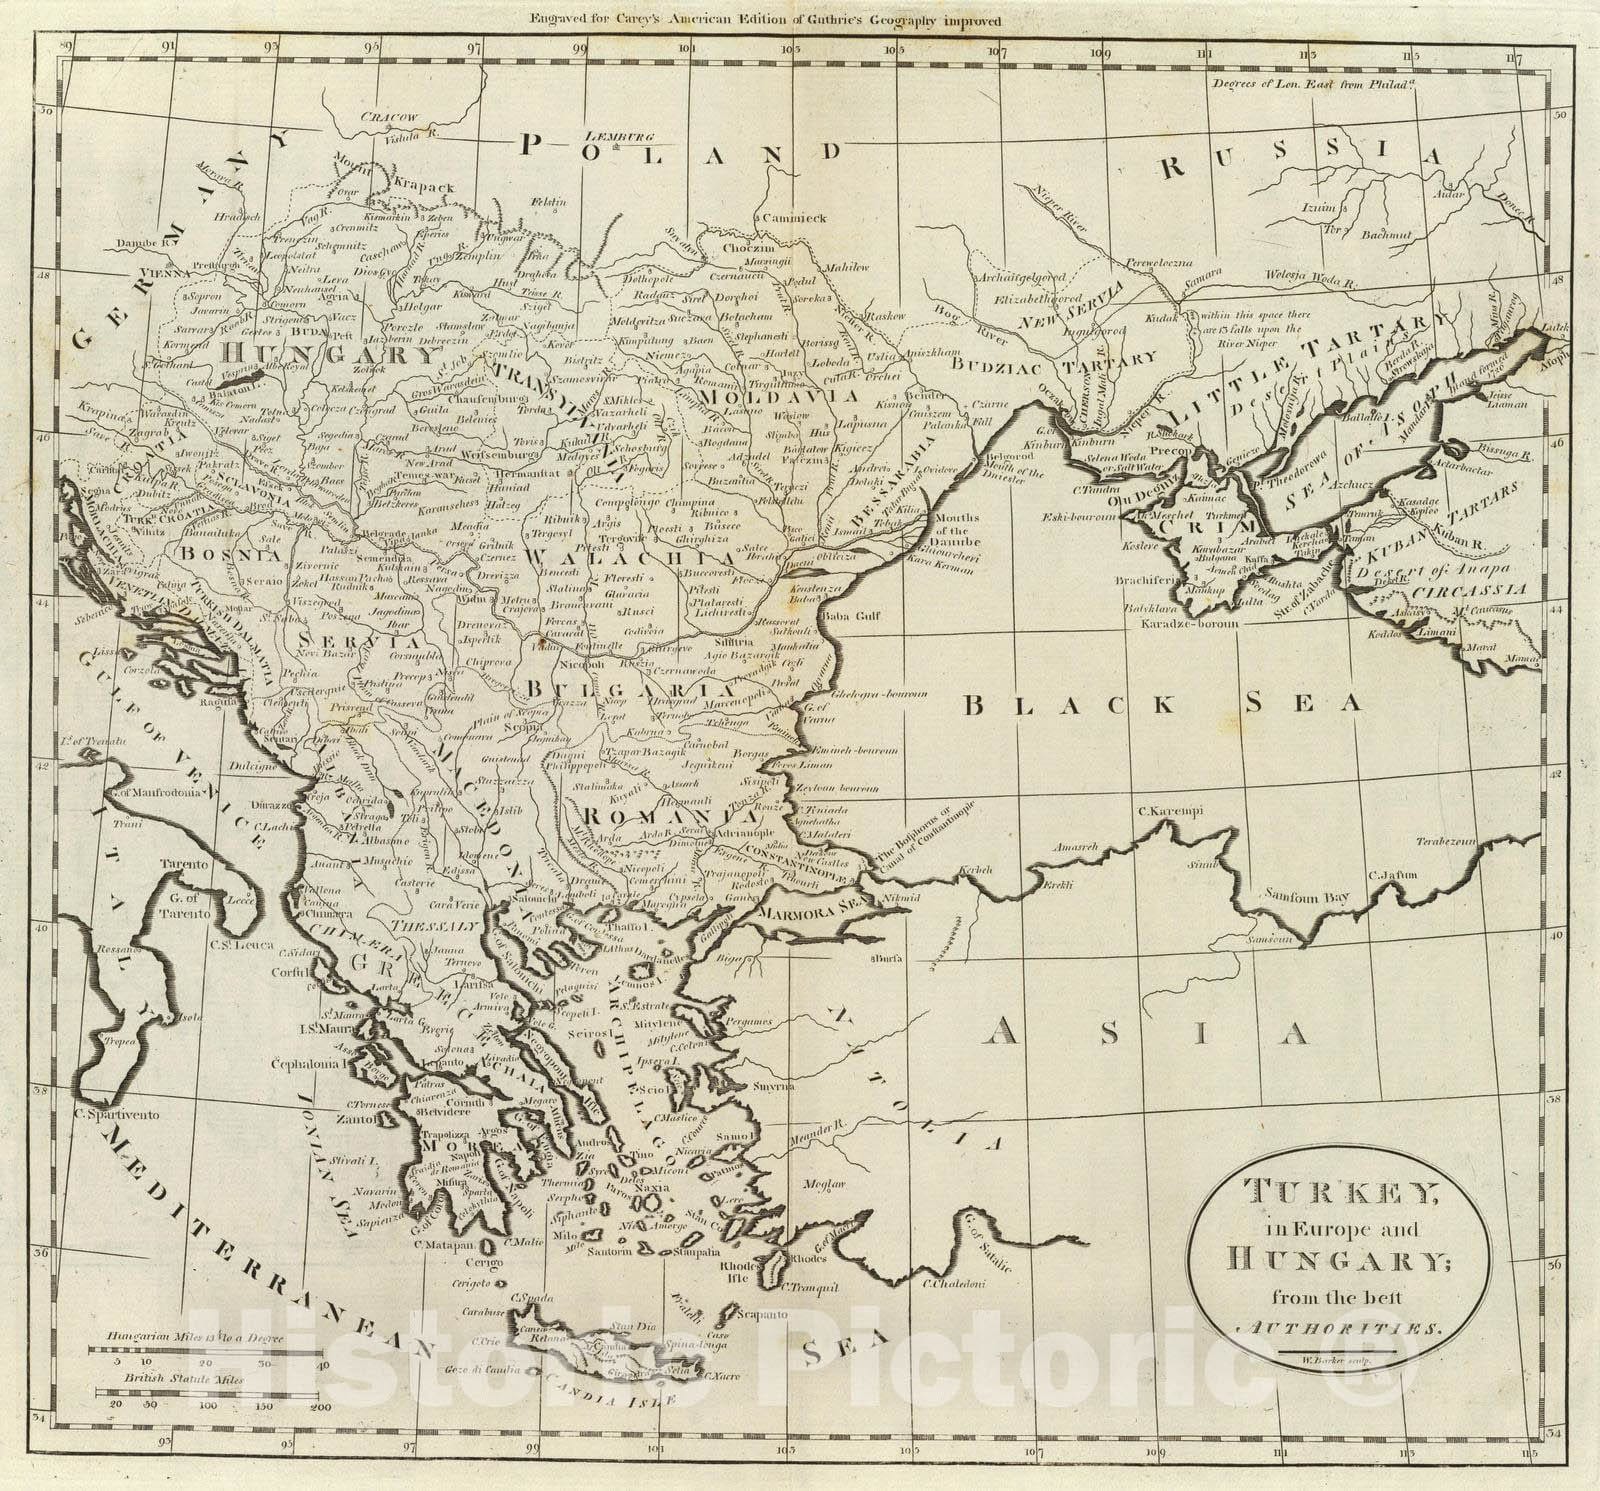 Historic Map : 1796 Turkey, in Europe and Hungary. - Vintage Wall Art